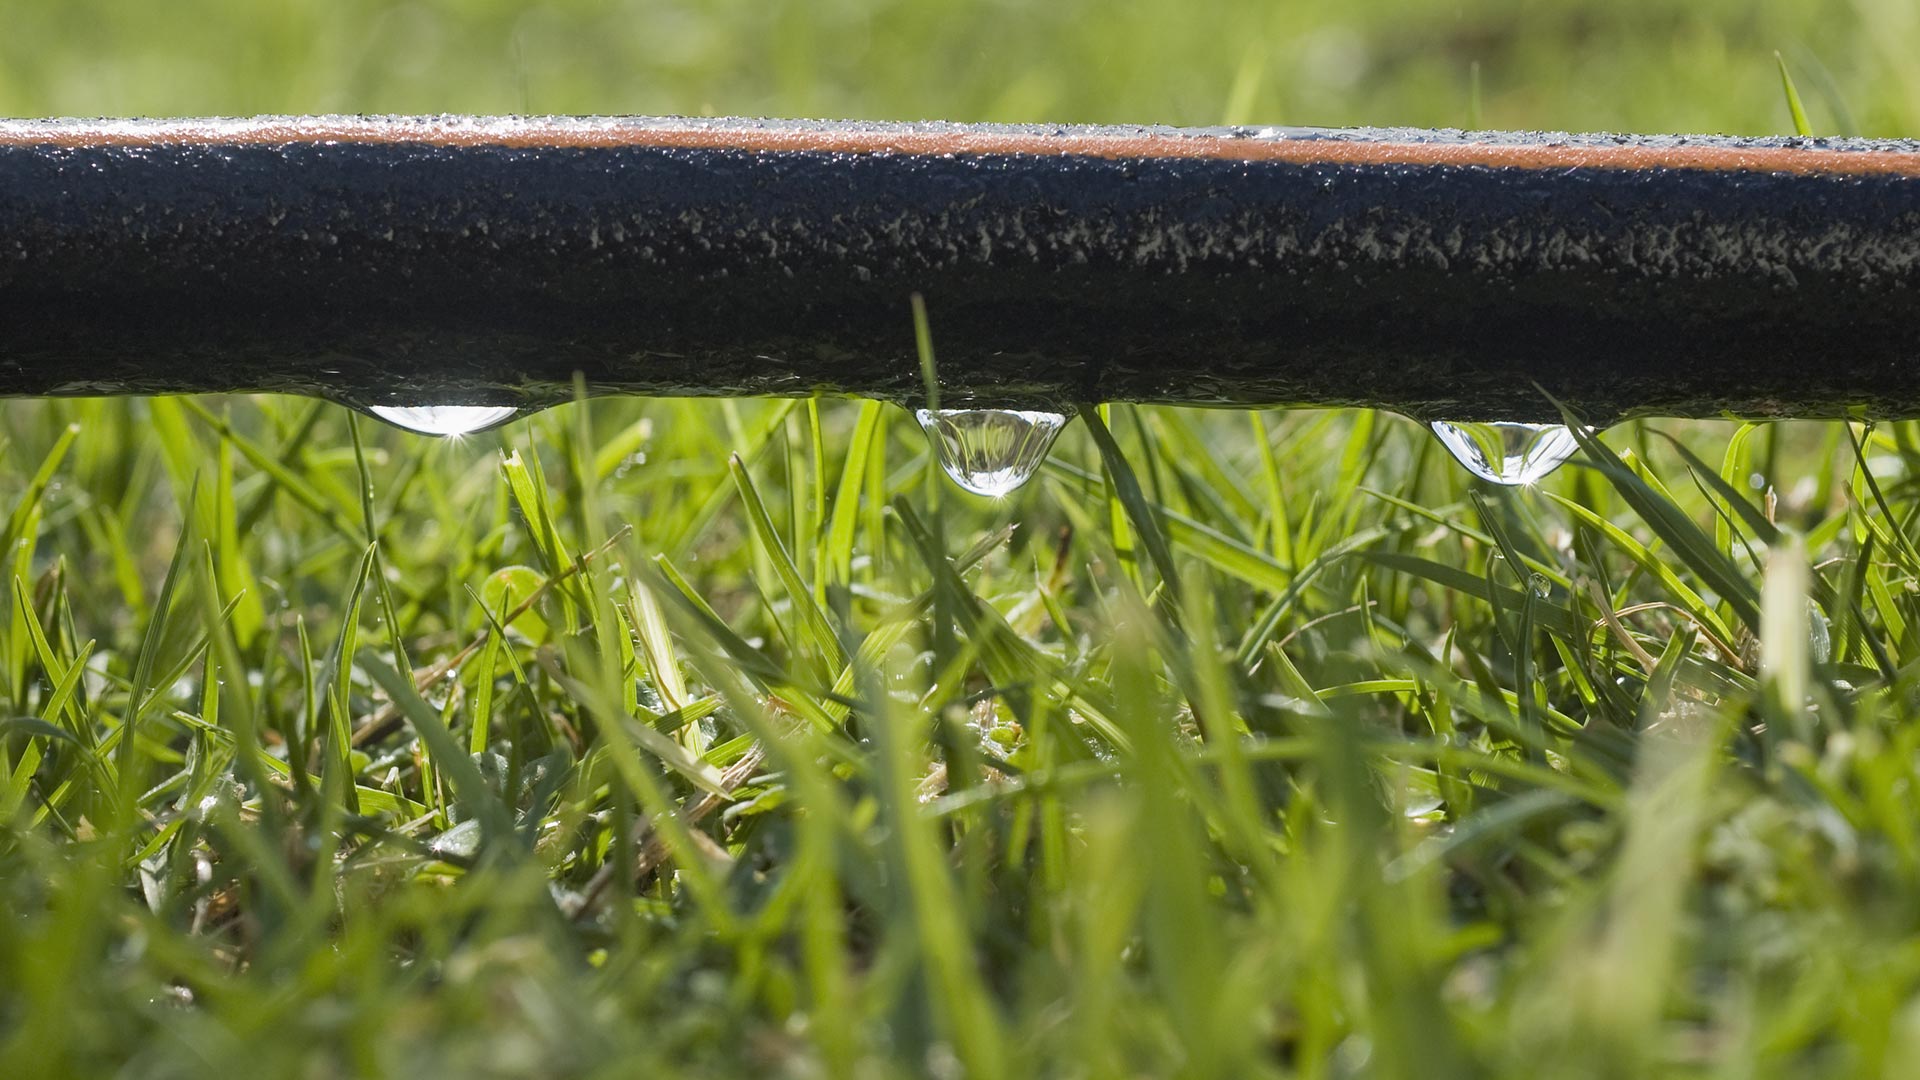 Ready to Invest in an Irrigation System? Consider a Drip Irrigation System!